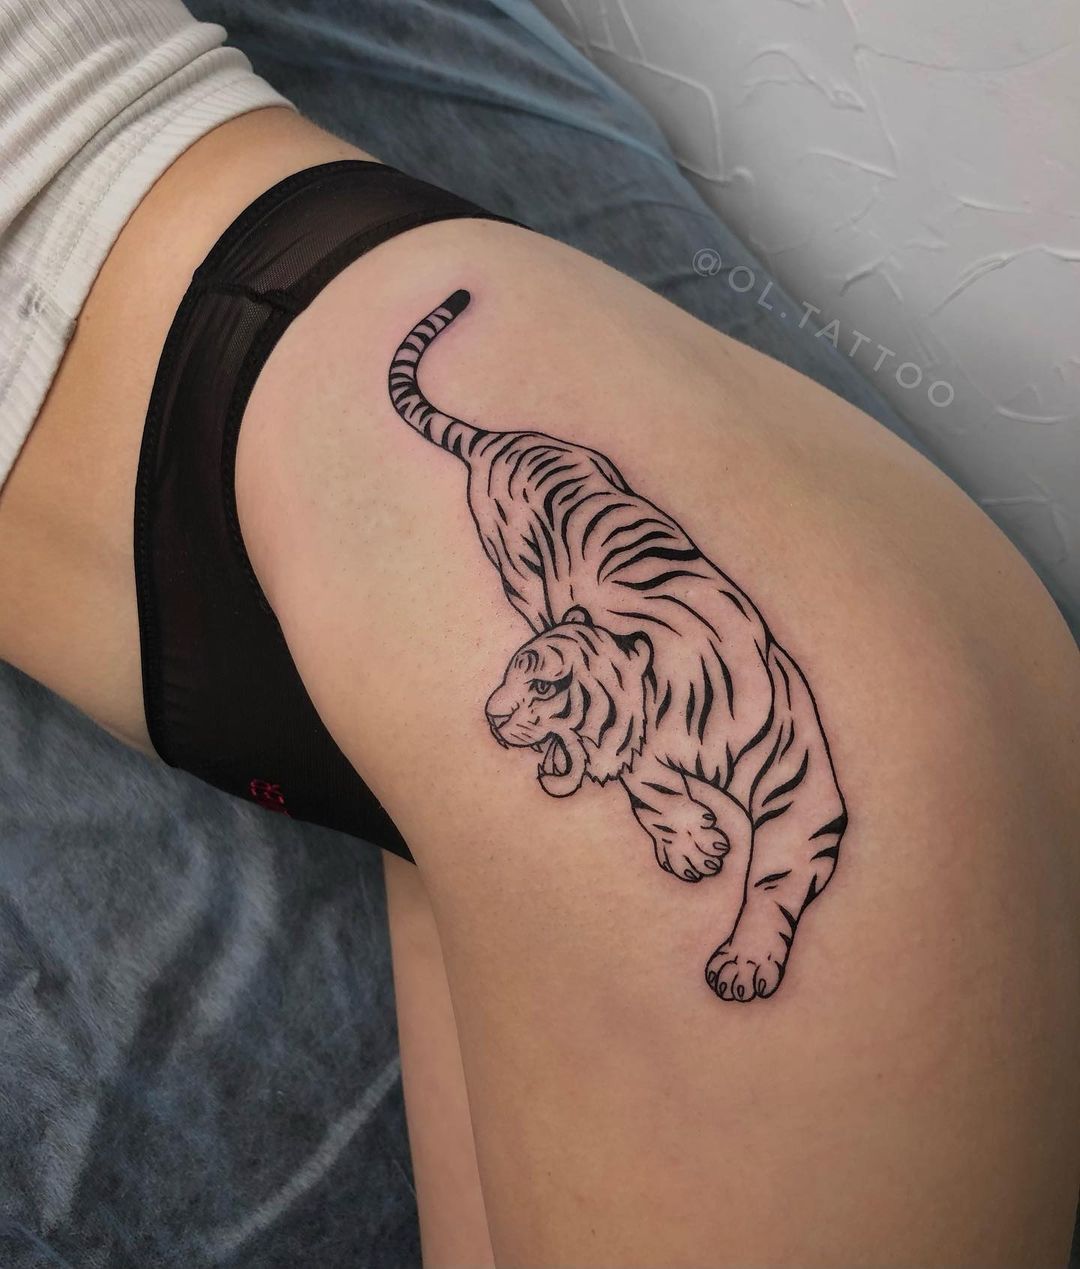 Black Cat Tattoo  Fineline Tiger boy by radflorist  Get in touch for  your fineline tattoo animals   tattoo tattoos finelinetattoo fineline  tigertattoo tiger animaltattoo aucklandtattoo delicatetattoos   Facebook